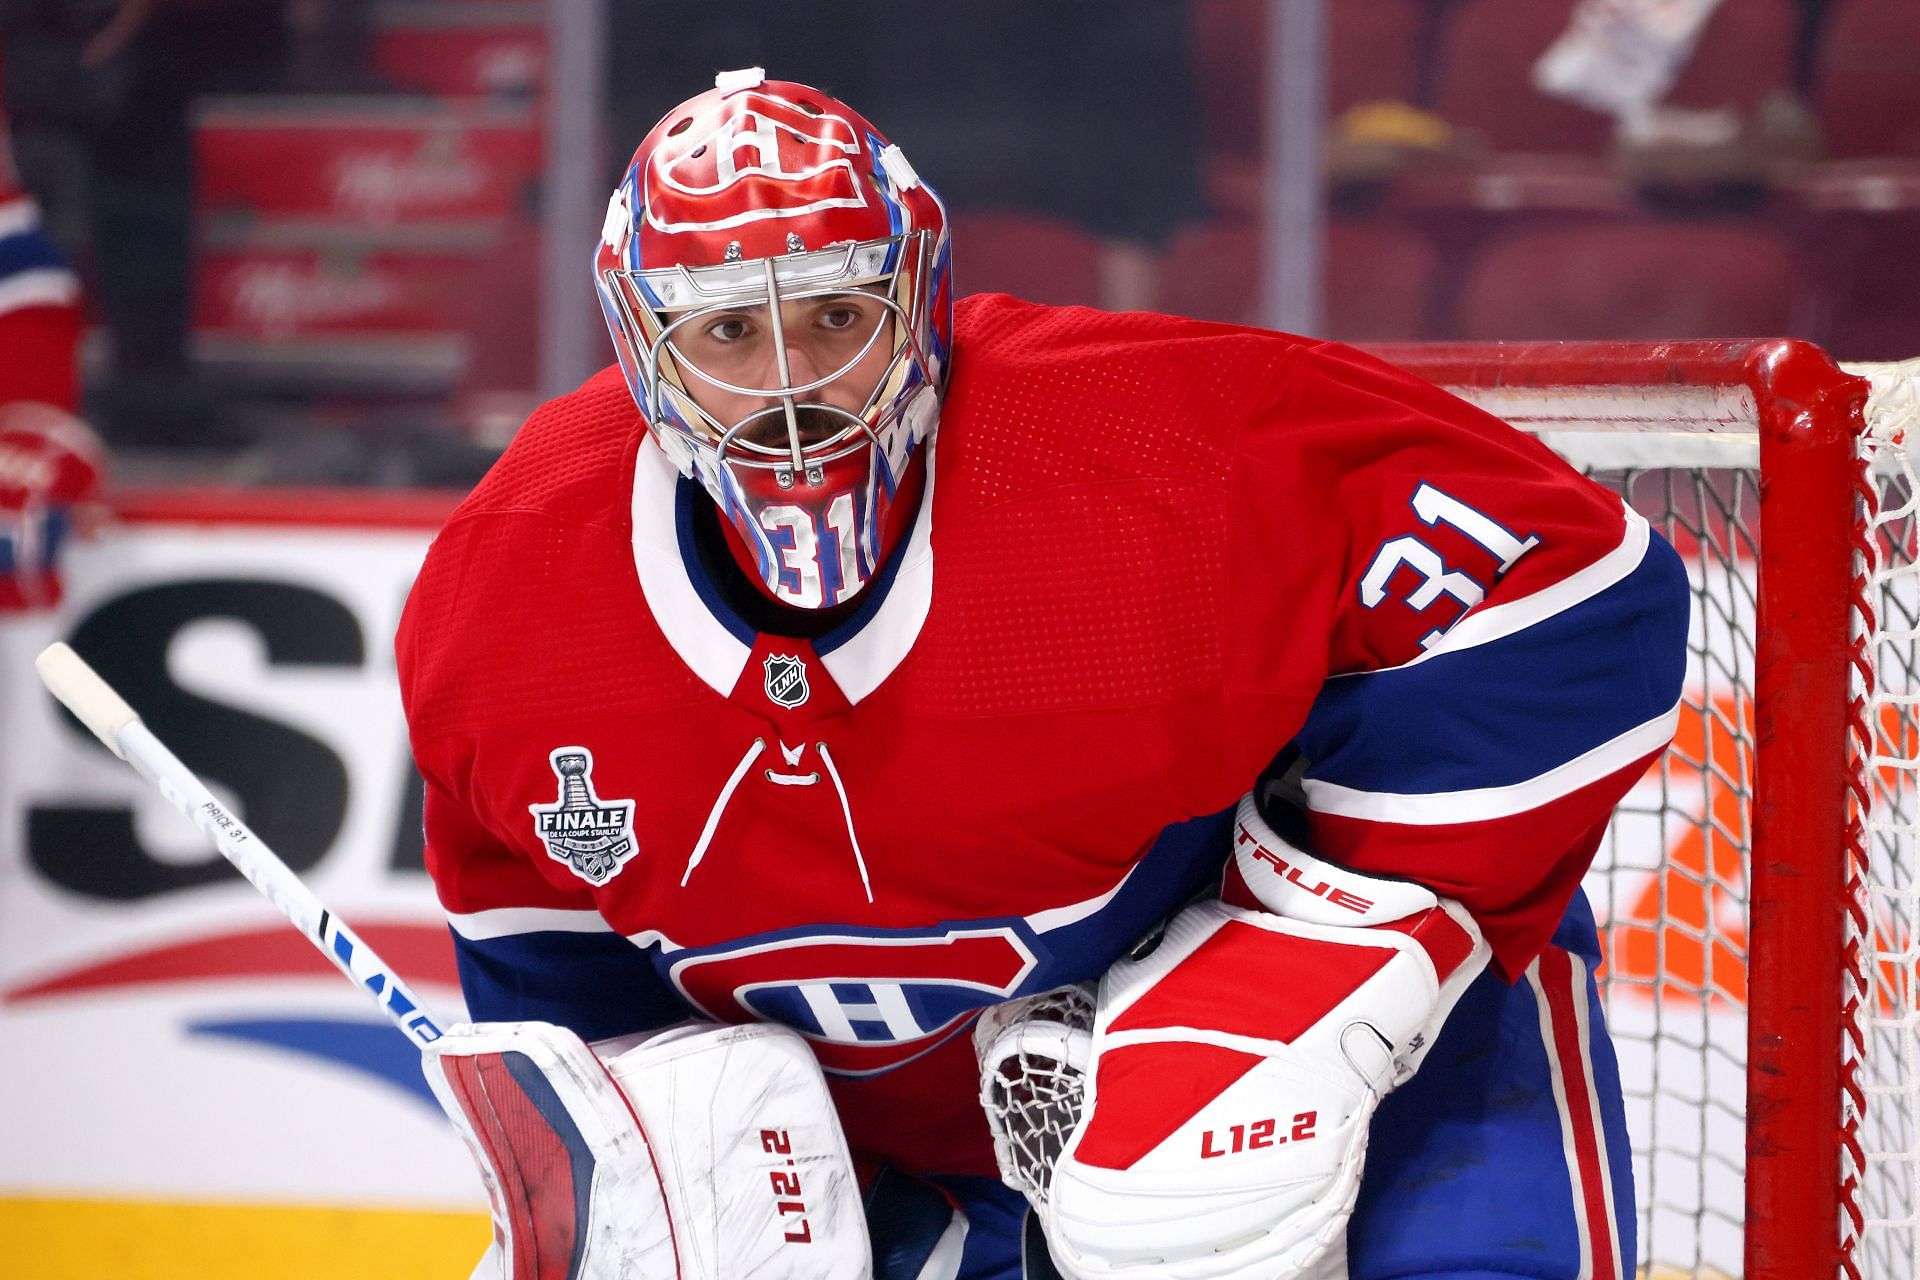 Carey Price Had an Amazing Season with the Montreal Canadiens